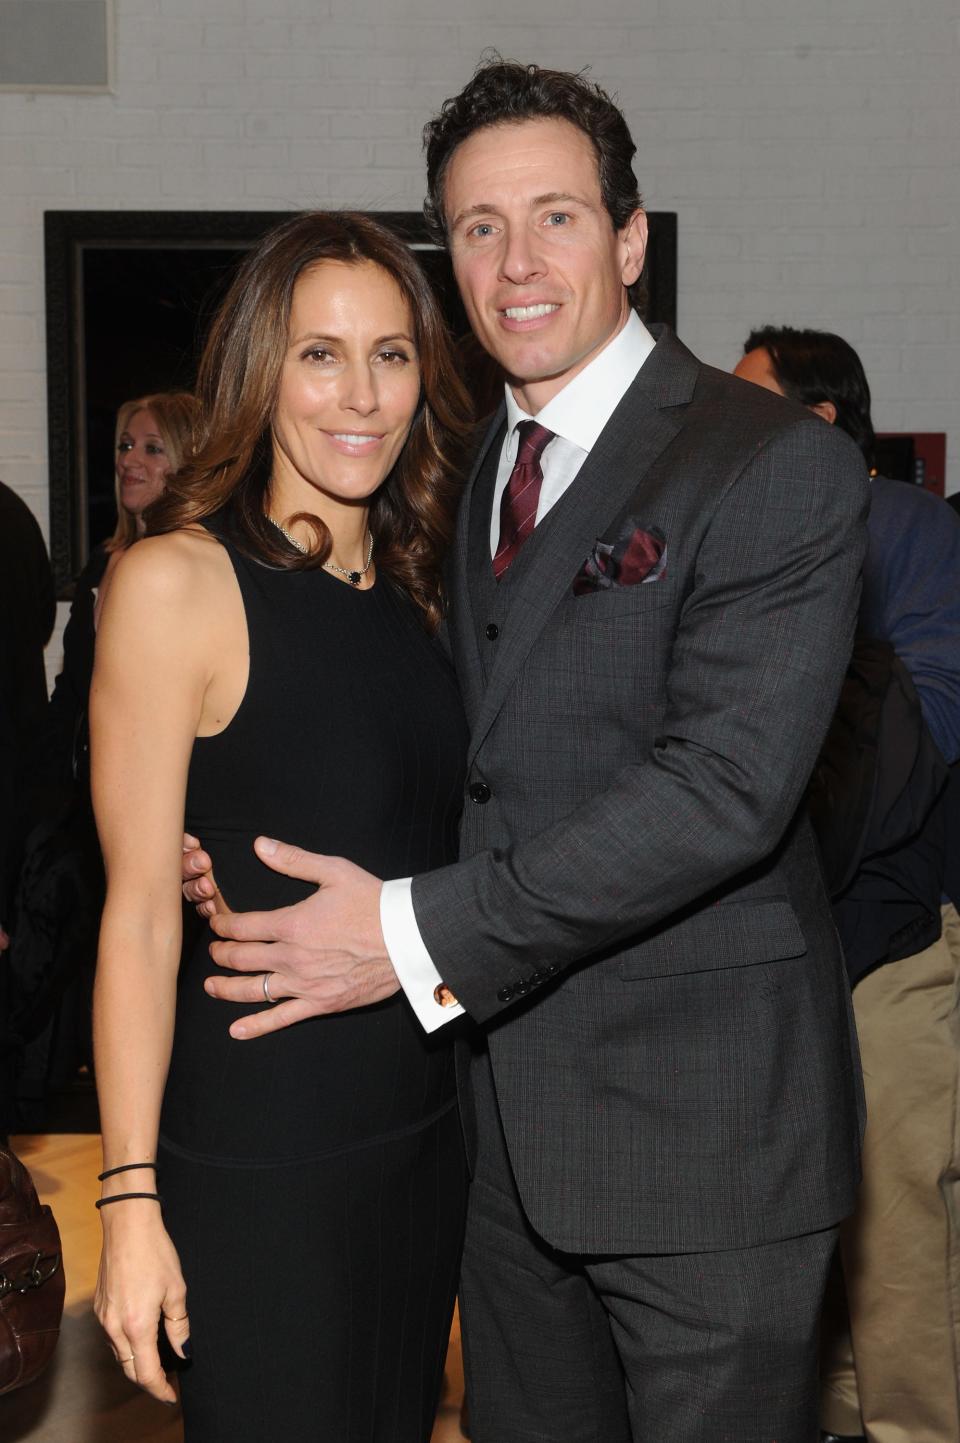 Cristina Cuomo and Chris Cuomo attend the Opening Of John Varvatos Madison Avenue on April 3, 2014 in New York City.